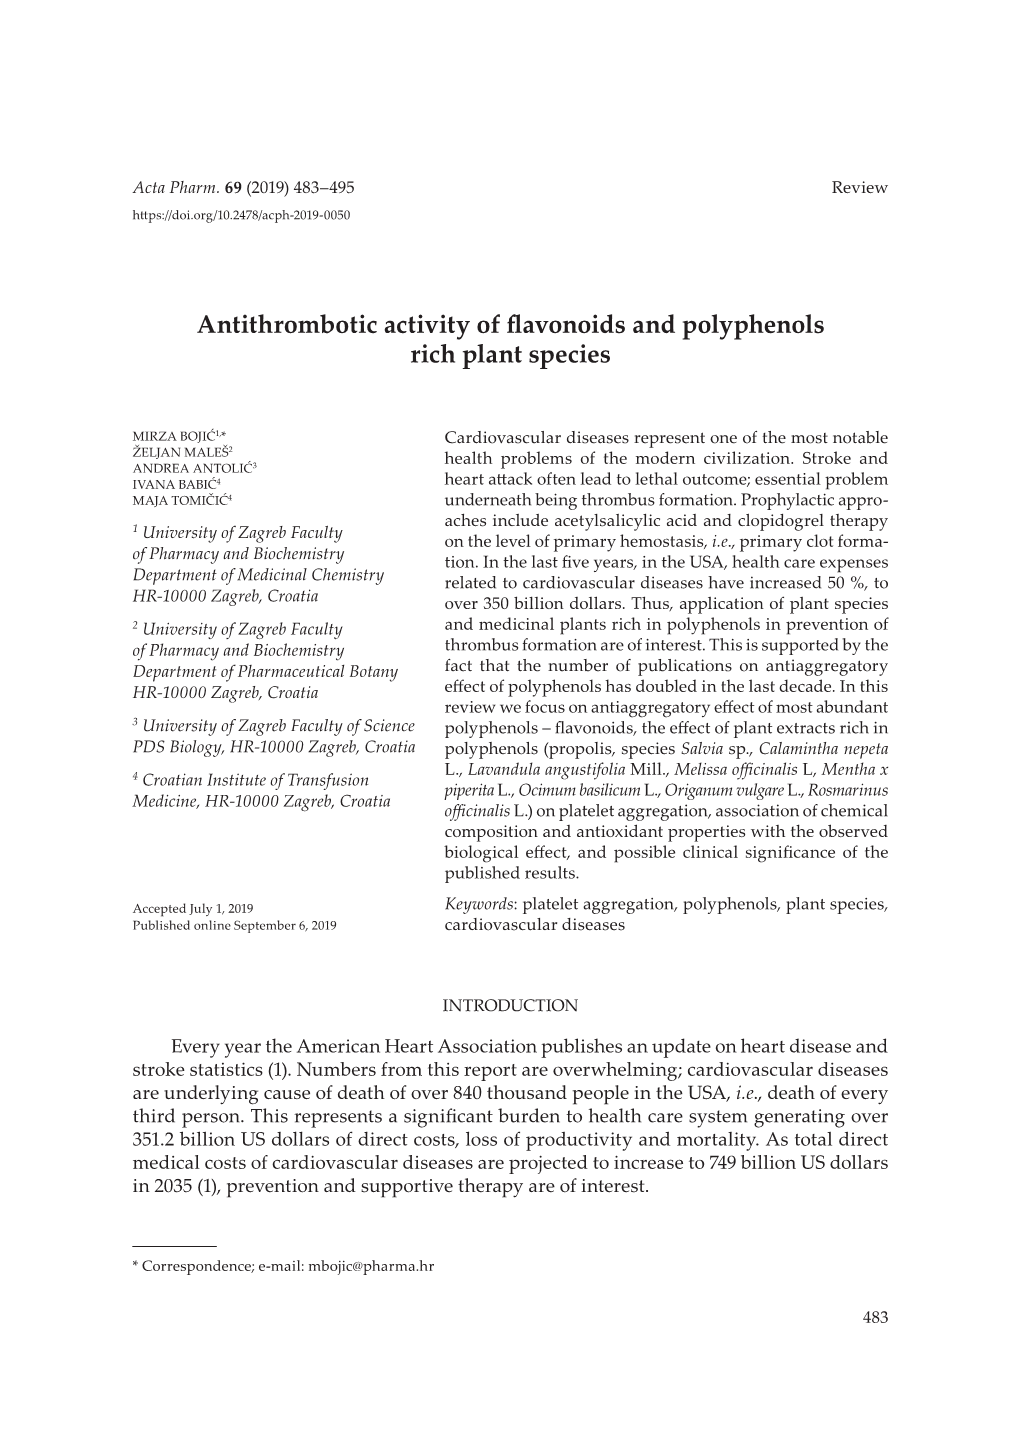 Antithrombotic Activity of Flavonoids and Polyphenols Rich Plant Species